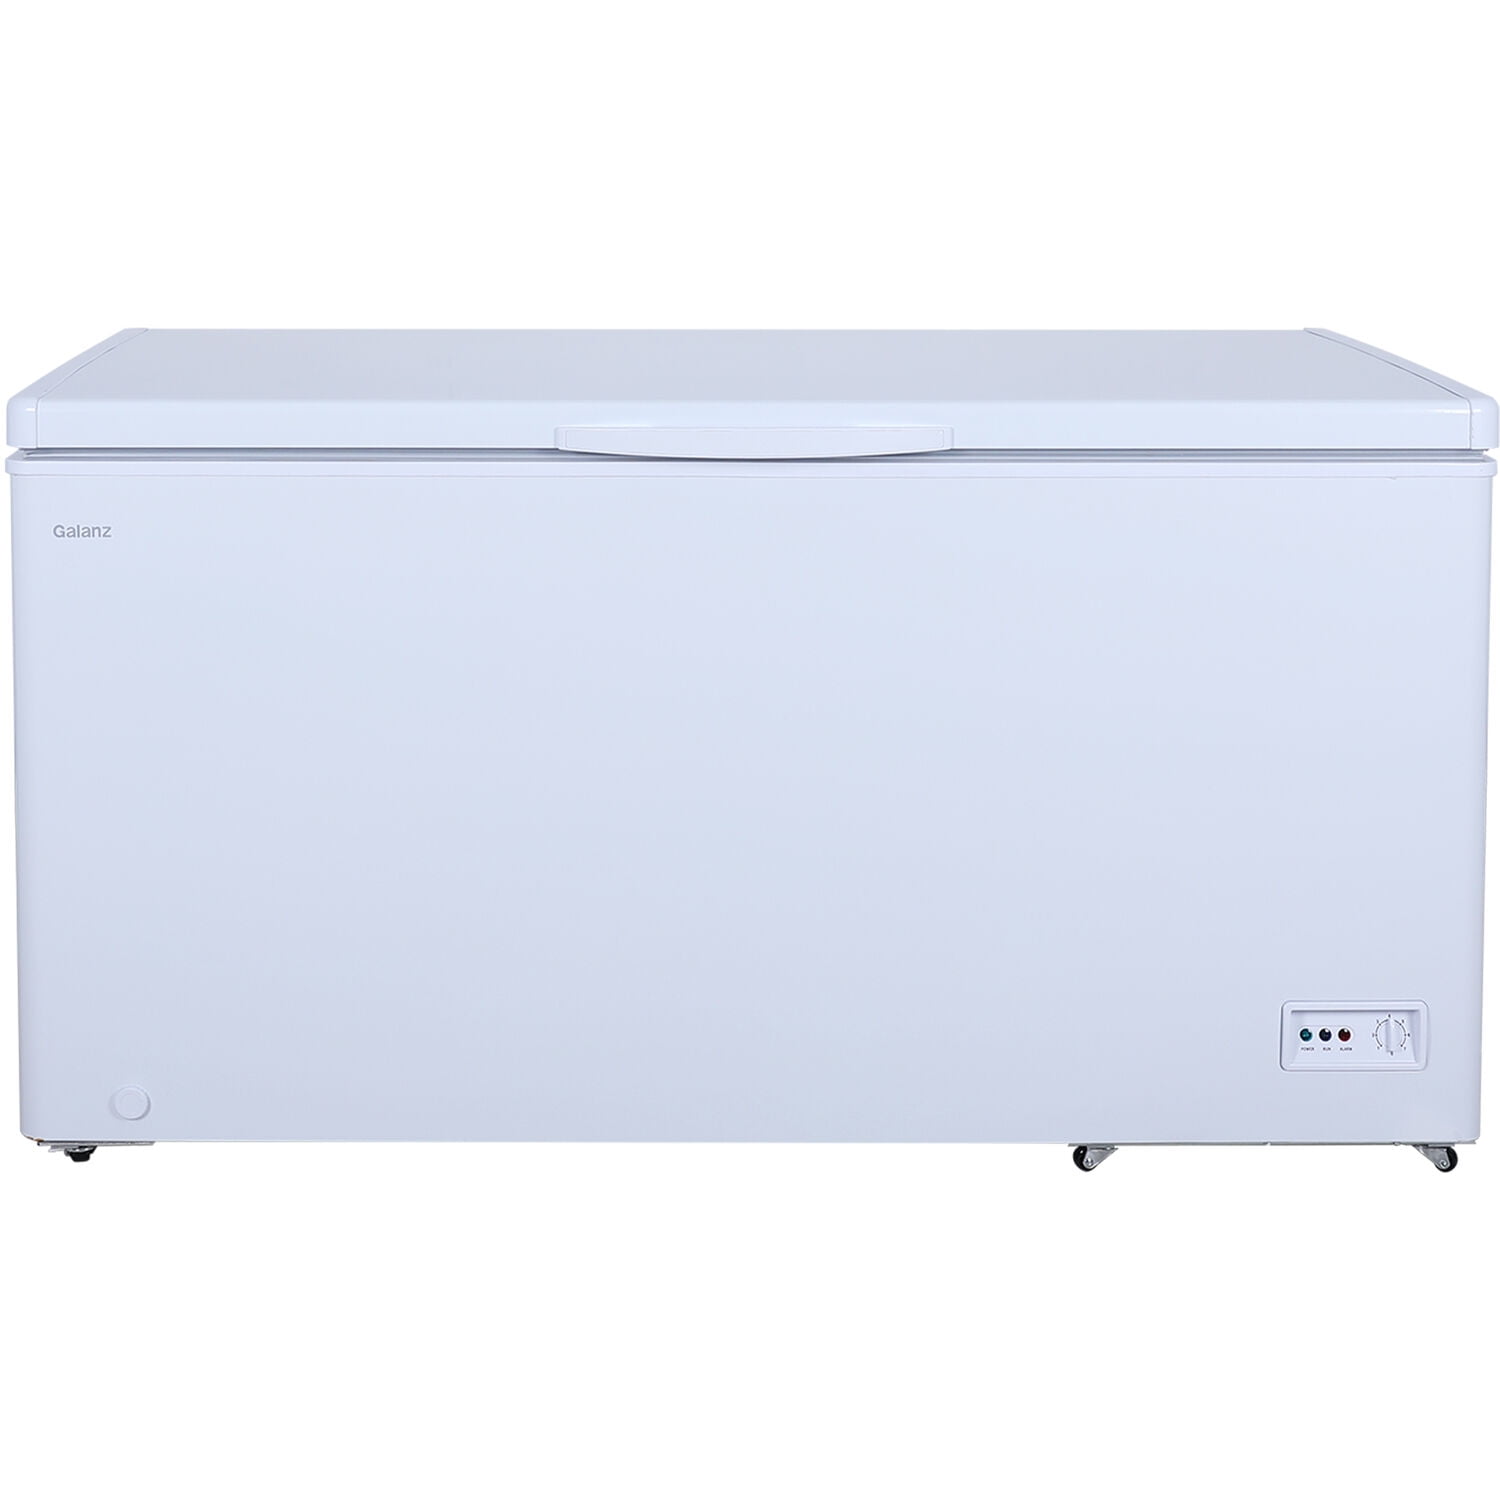 Galanz 44 In. 10-Cu. Ft. Manual Defrost Chest Freezer